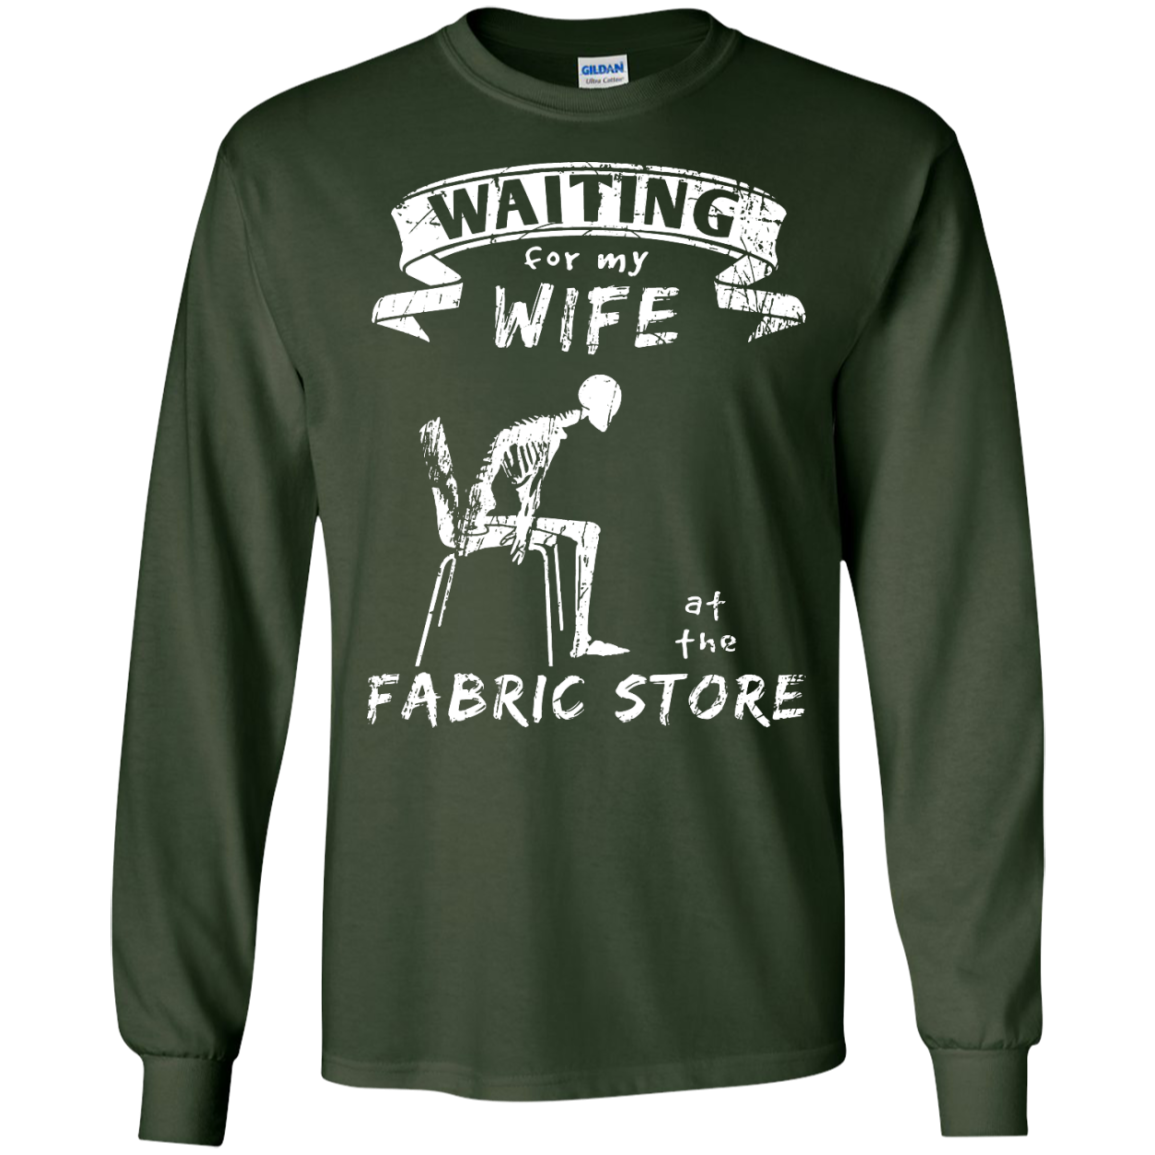 Waiting at the Fabric Store Long Sleeve T-Shirts - Crafter4Life - 1